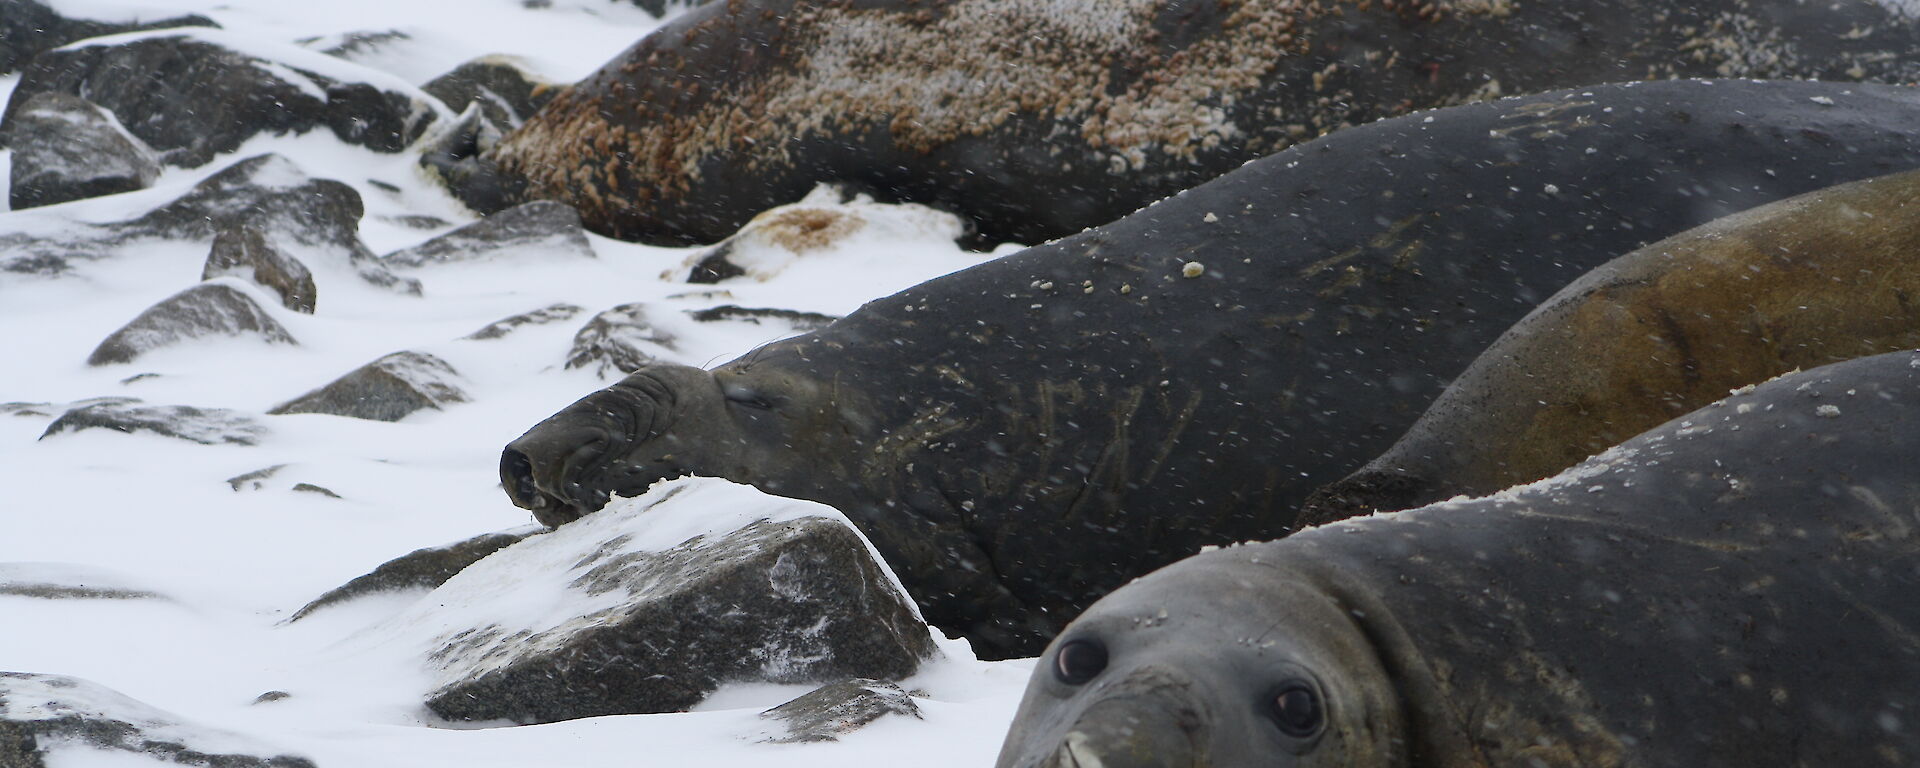 Elphant Seals in the rock and snow with one looking directly at the camera